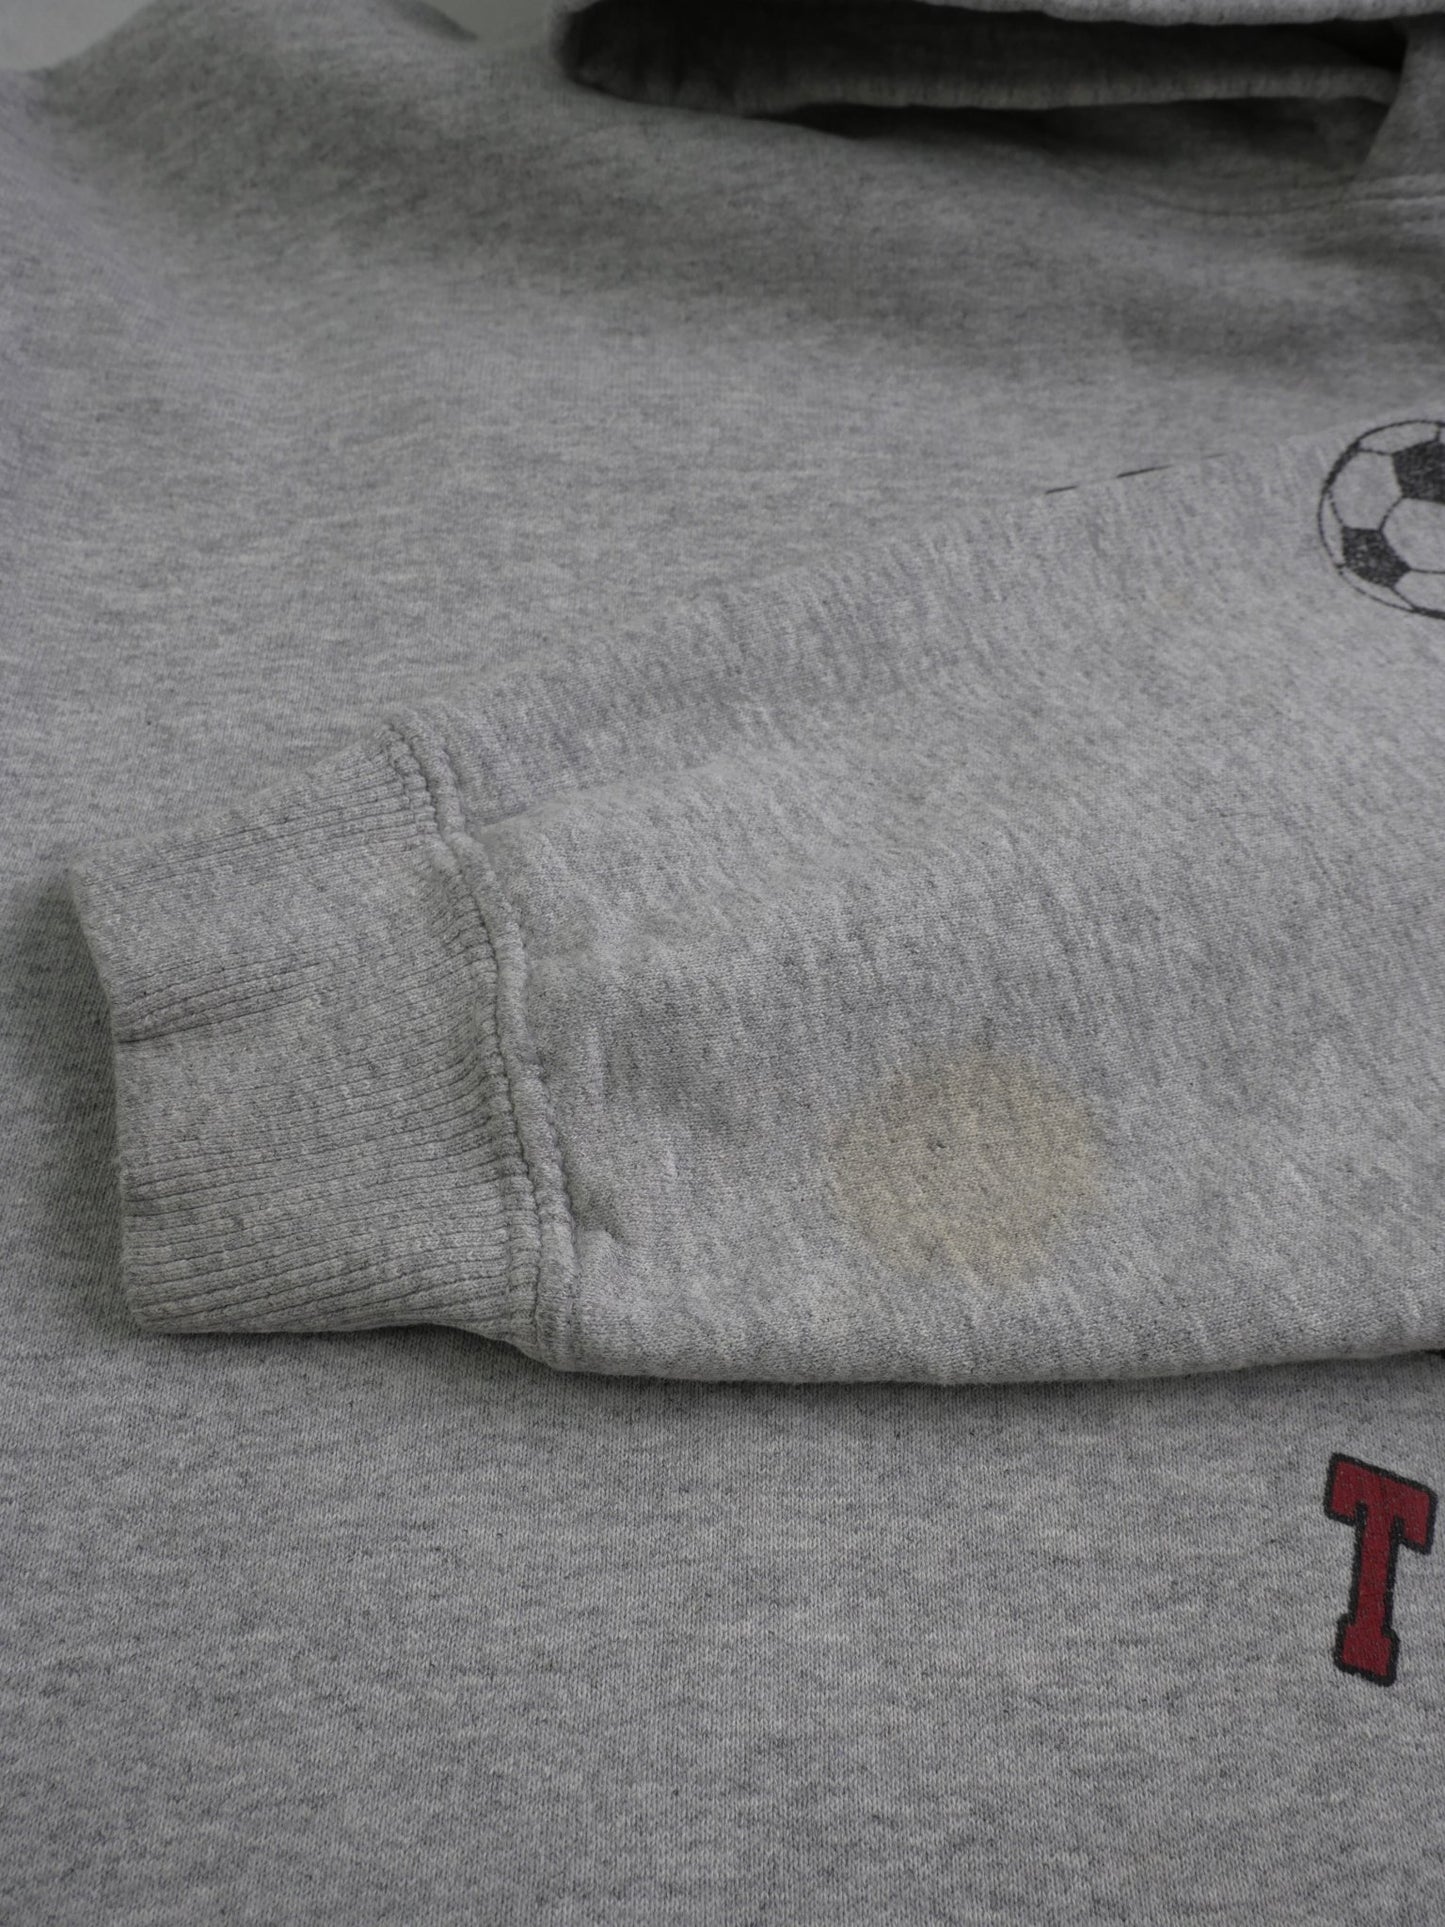 'Soccer Tournament' printed Graphic grey Hoodie - Peeces